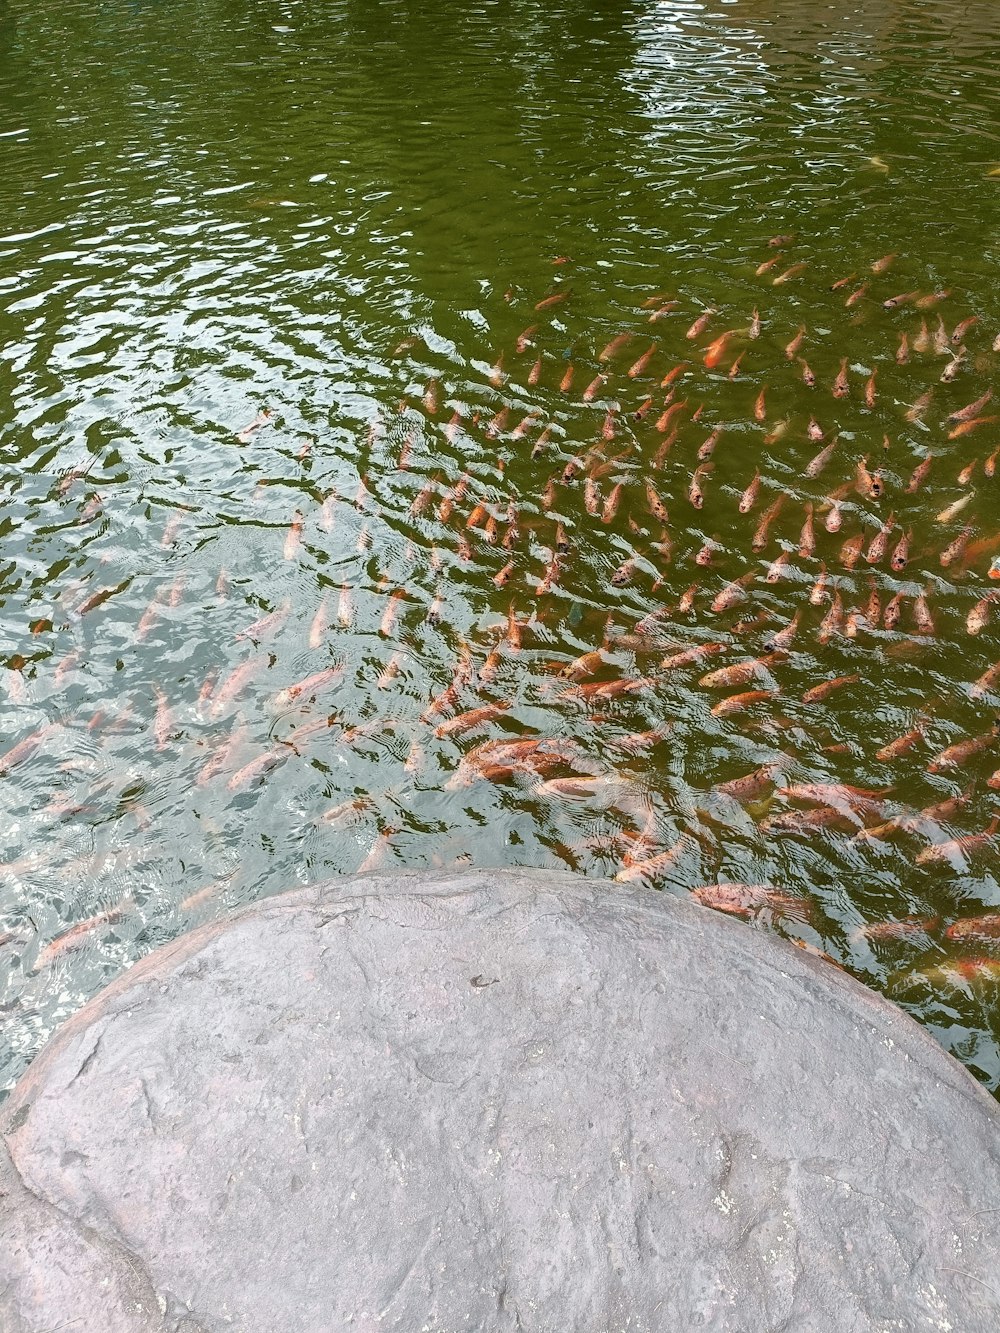 a large group of fish swimming in a pond